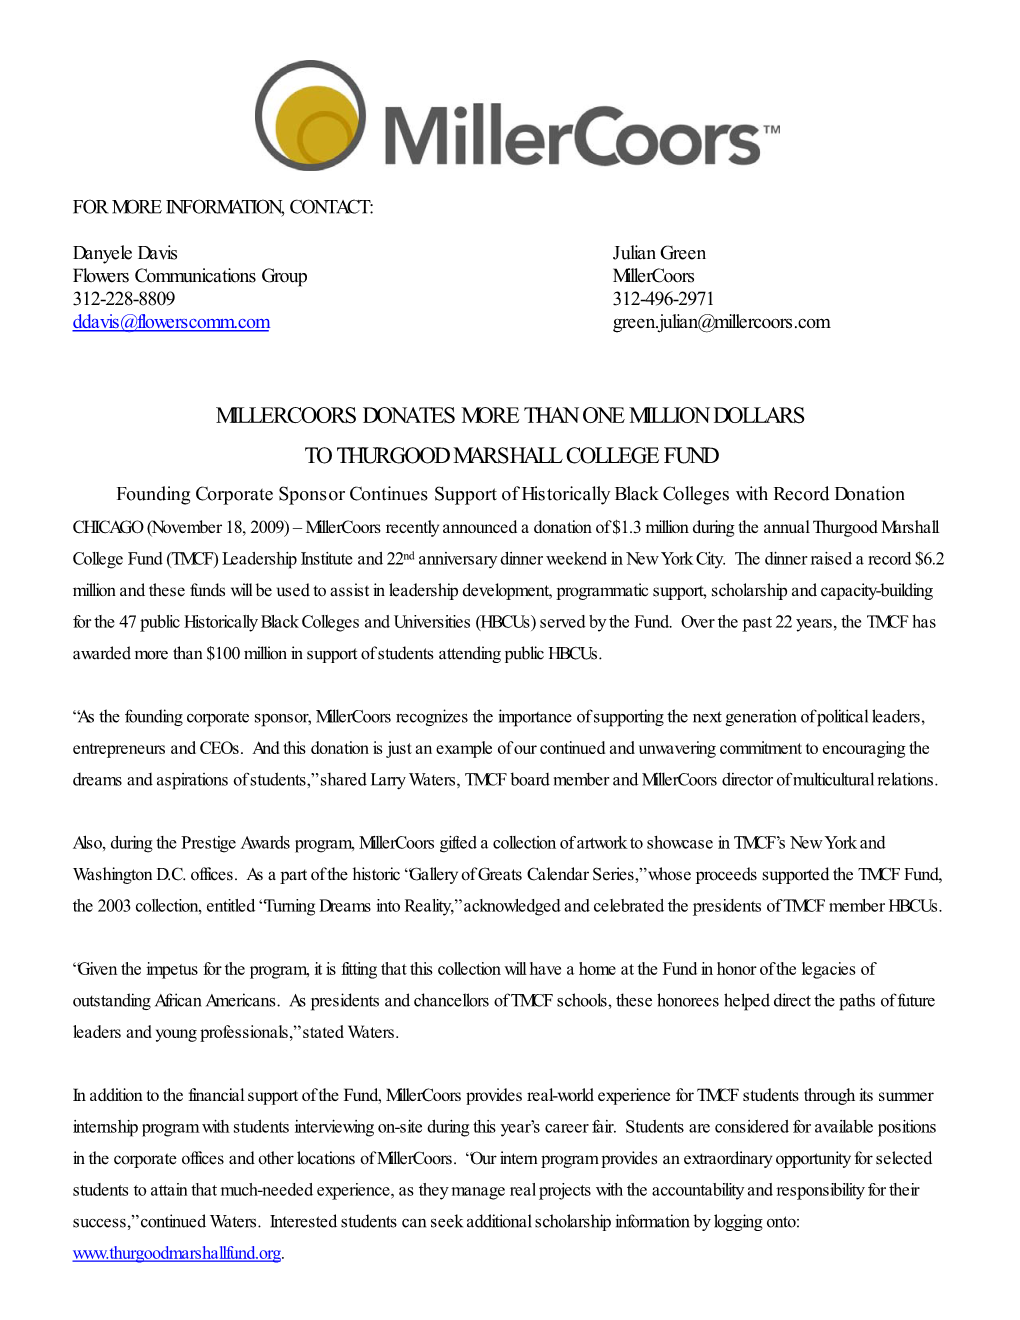 Millercoors Donates More Than One Million Dollars to Thurgood Marshall College Fund